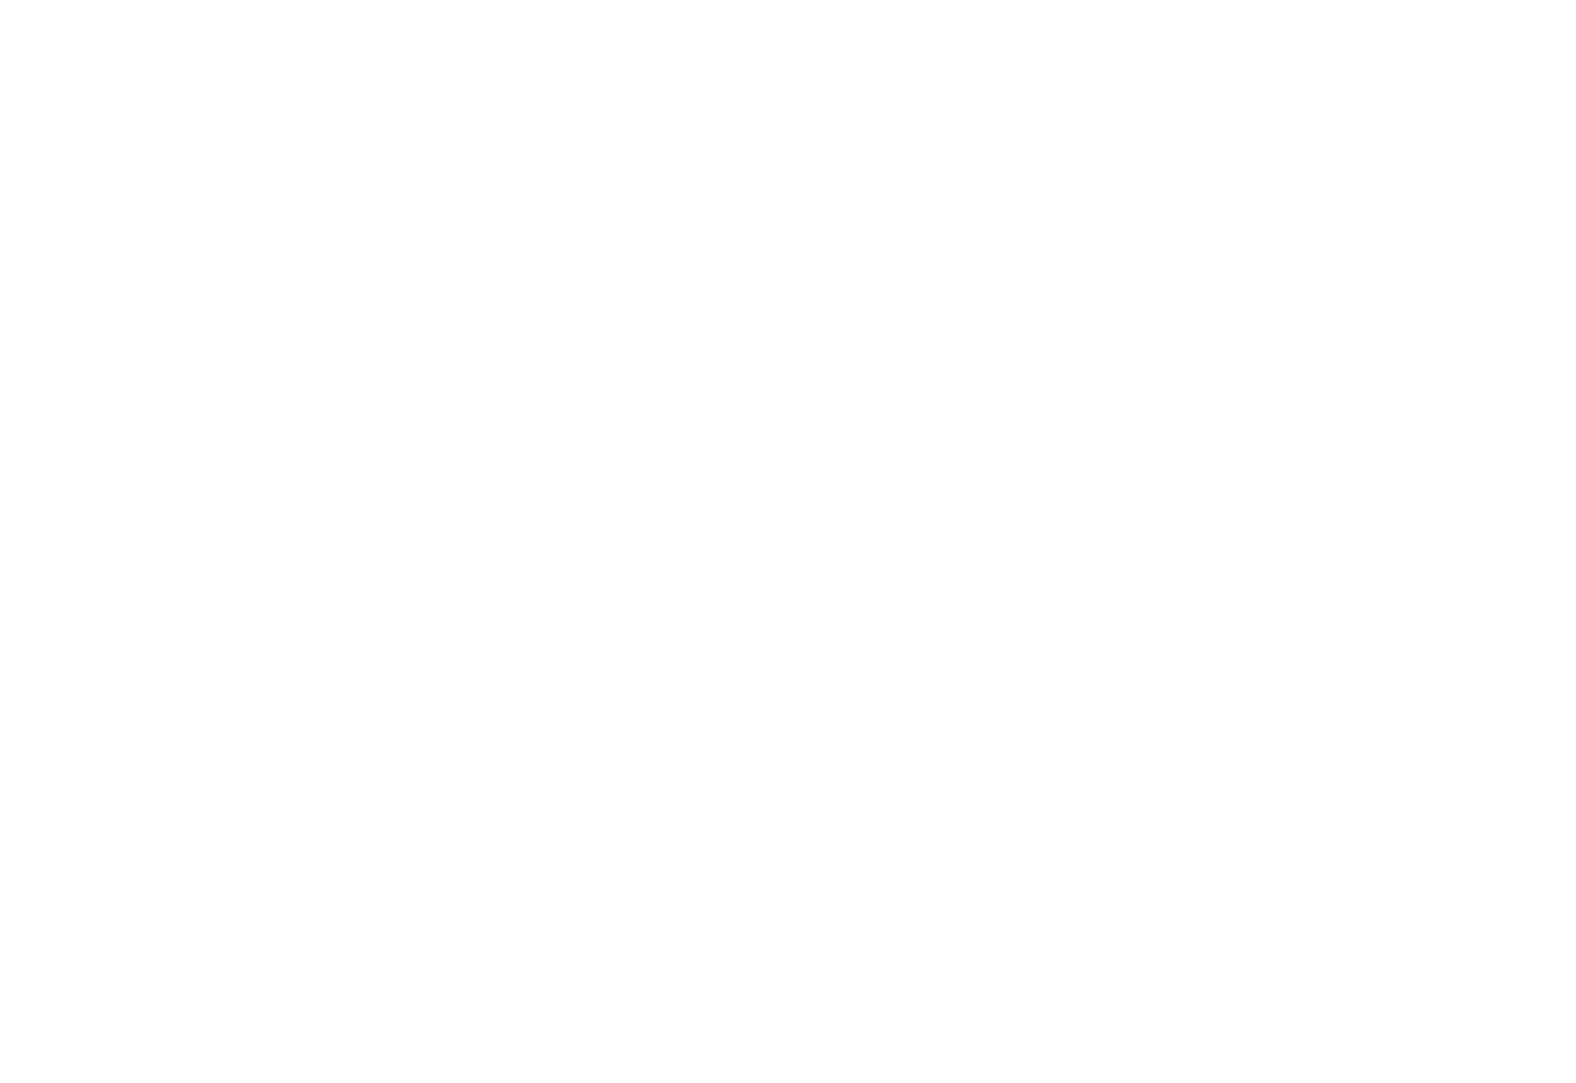 LOGO_CompassPartners_WHITE-01_bez_marg.png